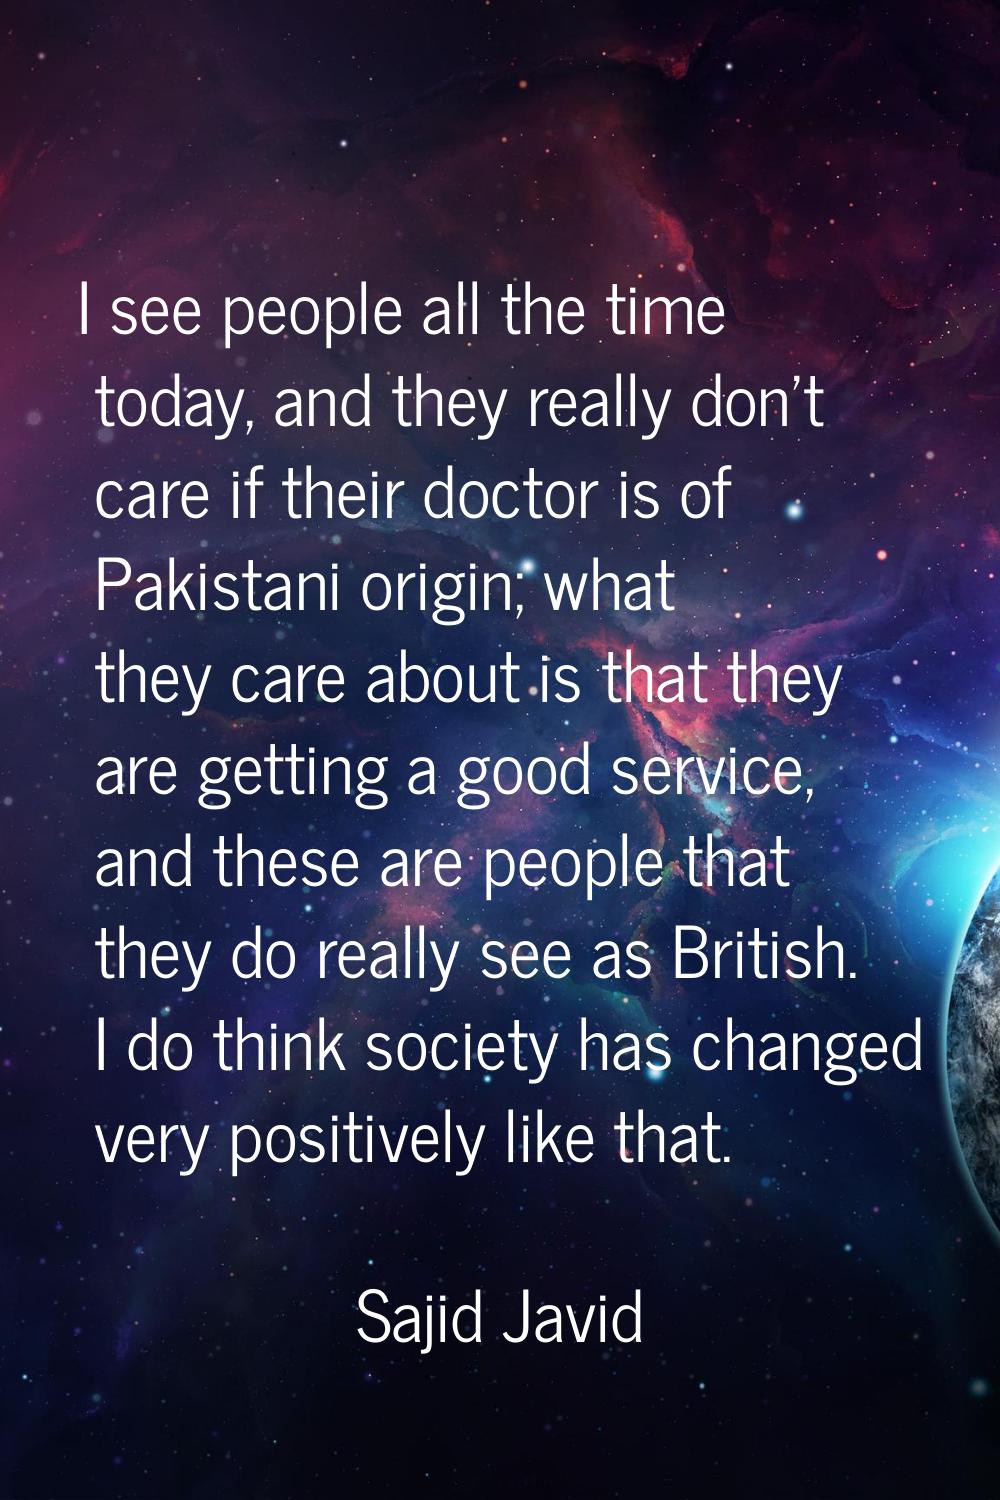 I see people all the time today, and they really don't care if their doctor is of Pakistani origin;